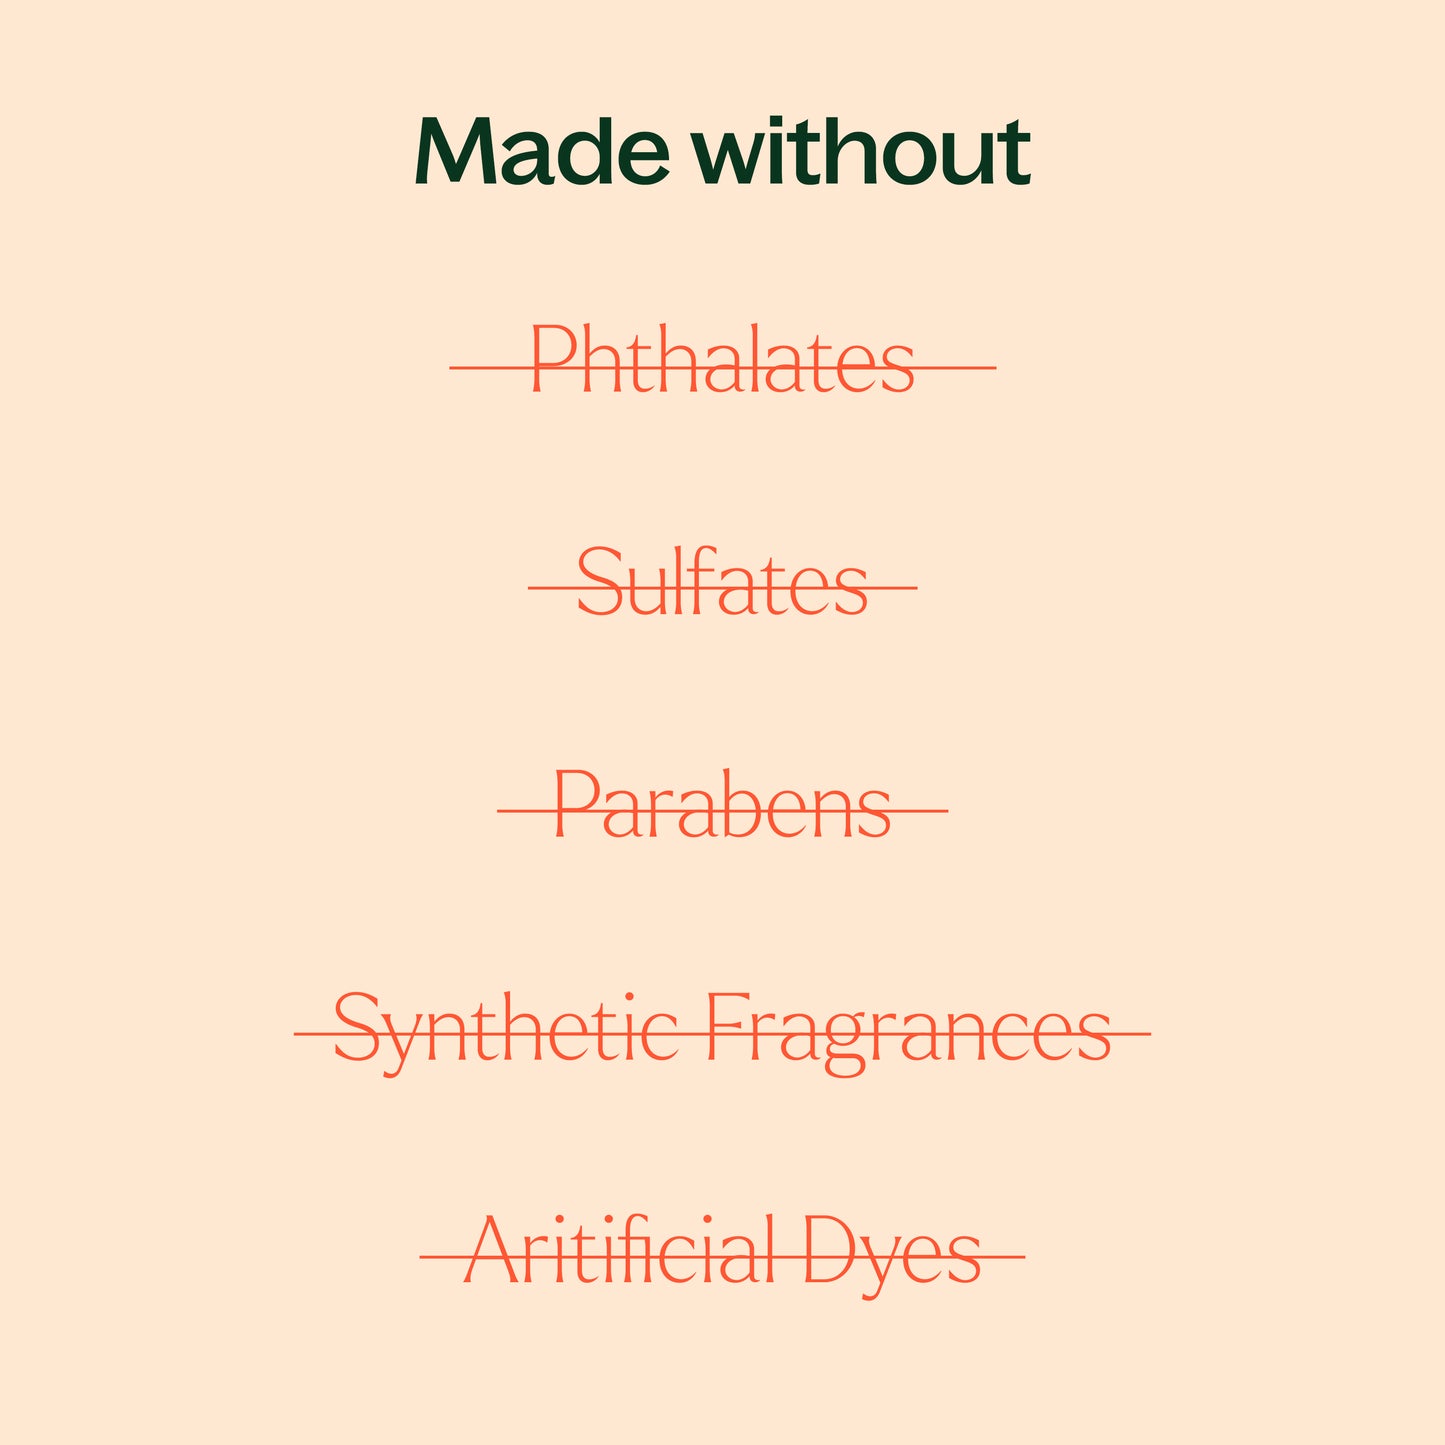 made without phthalates, sulfates, parabens, synthetic fragrances, artifical dyes.